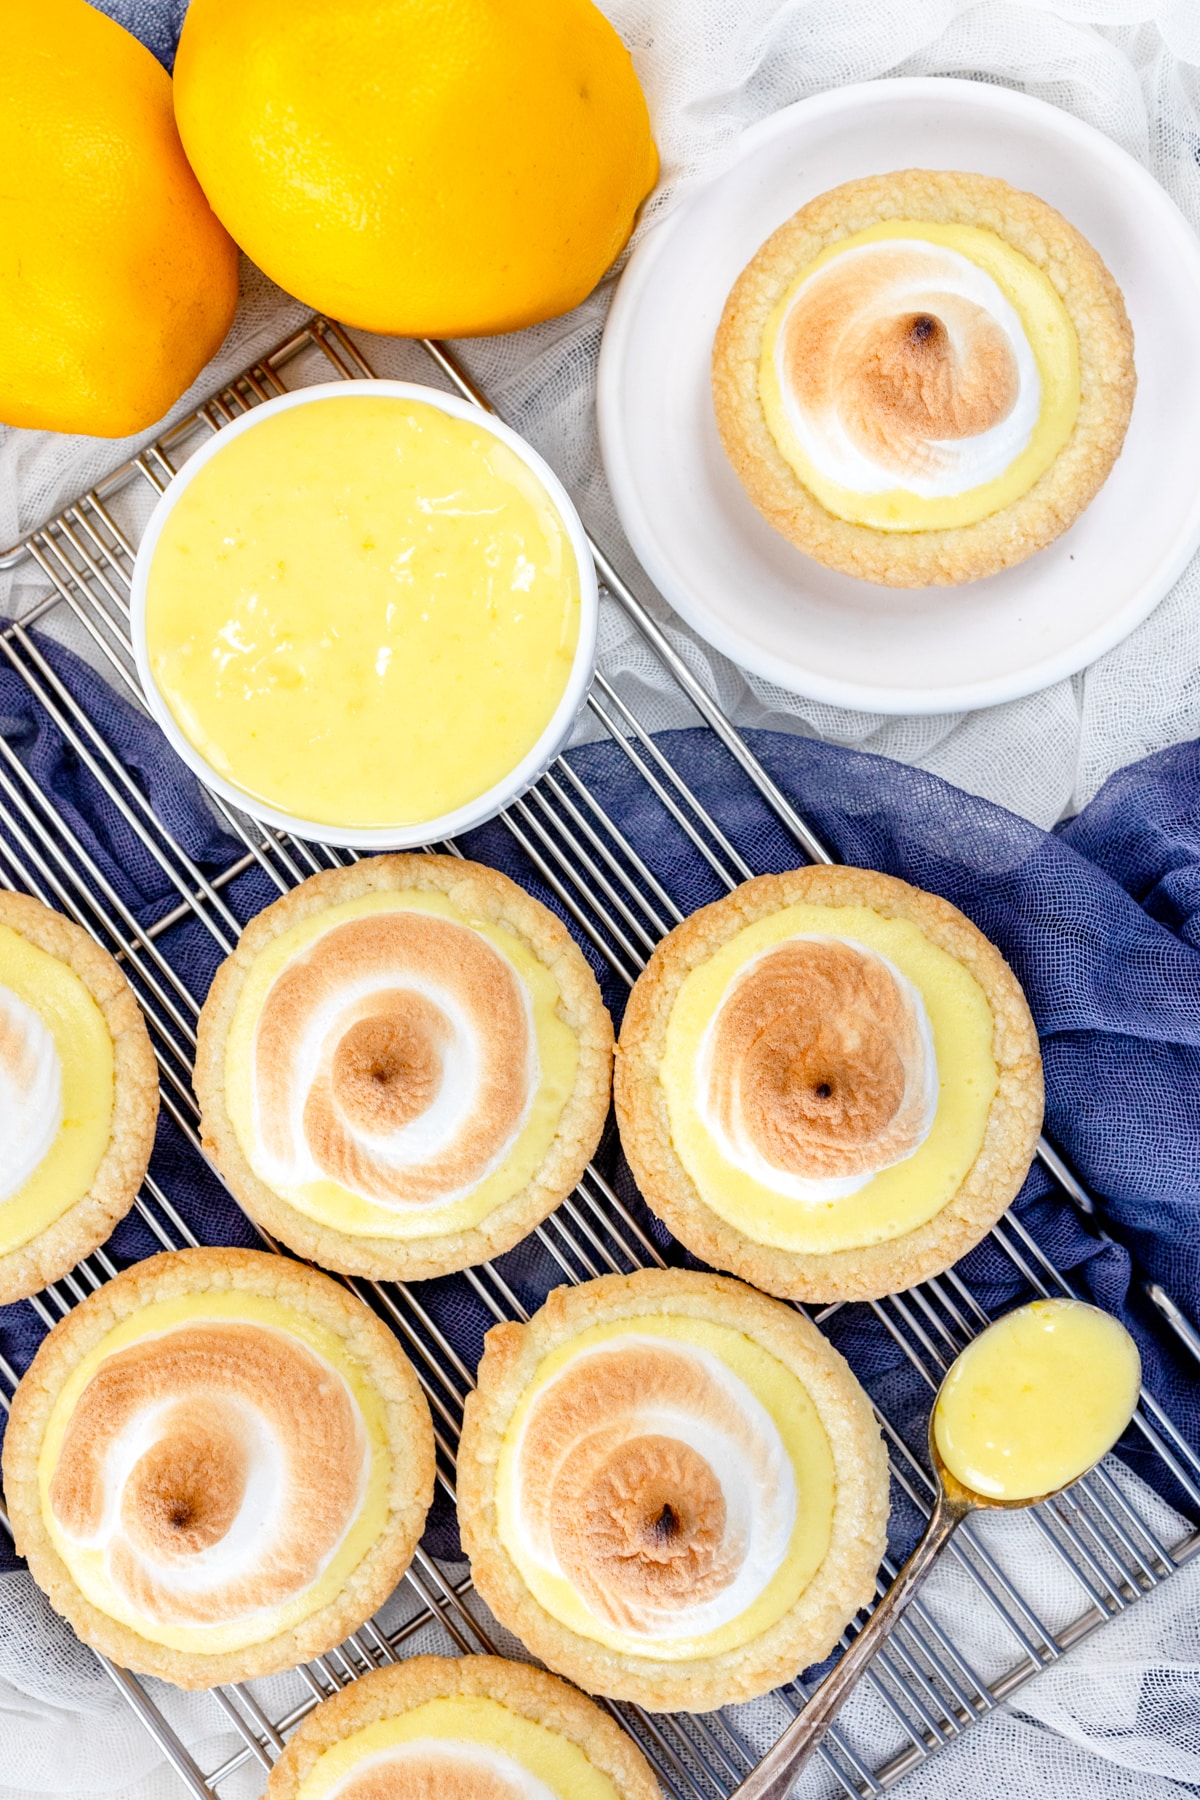 Top view of Lemon Meringue Cookies on a wire rack, with a spoon filled with lemon curd next to them.